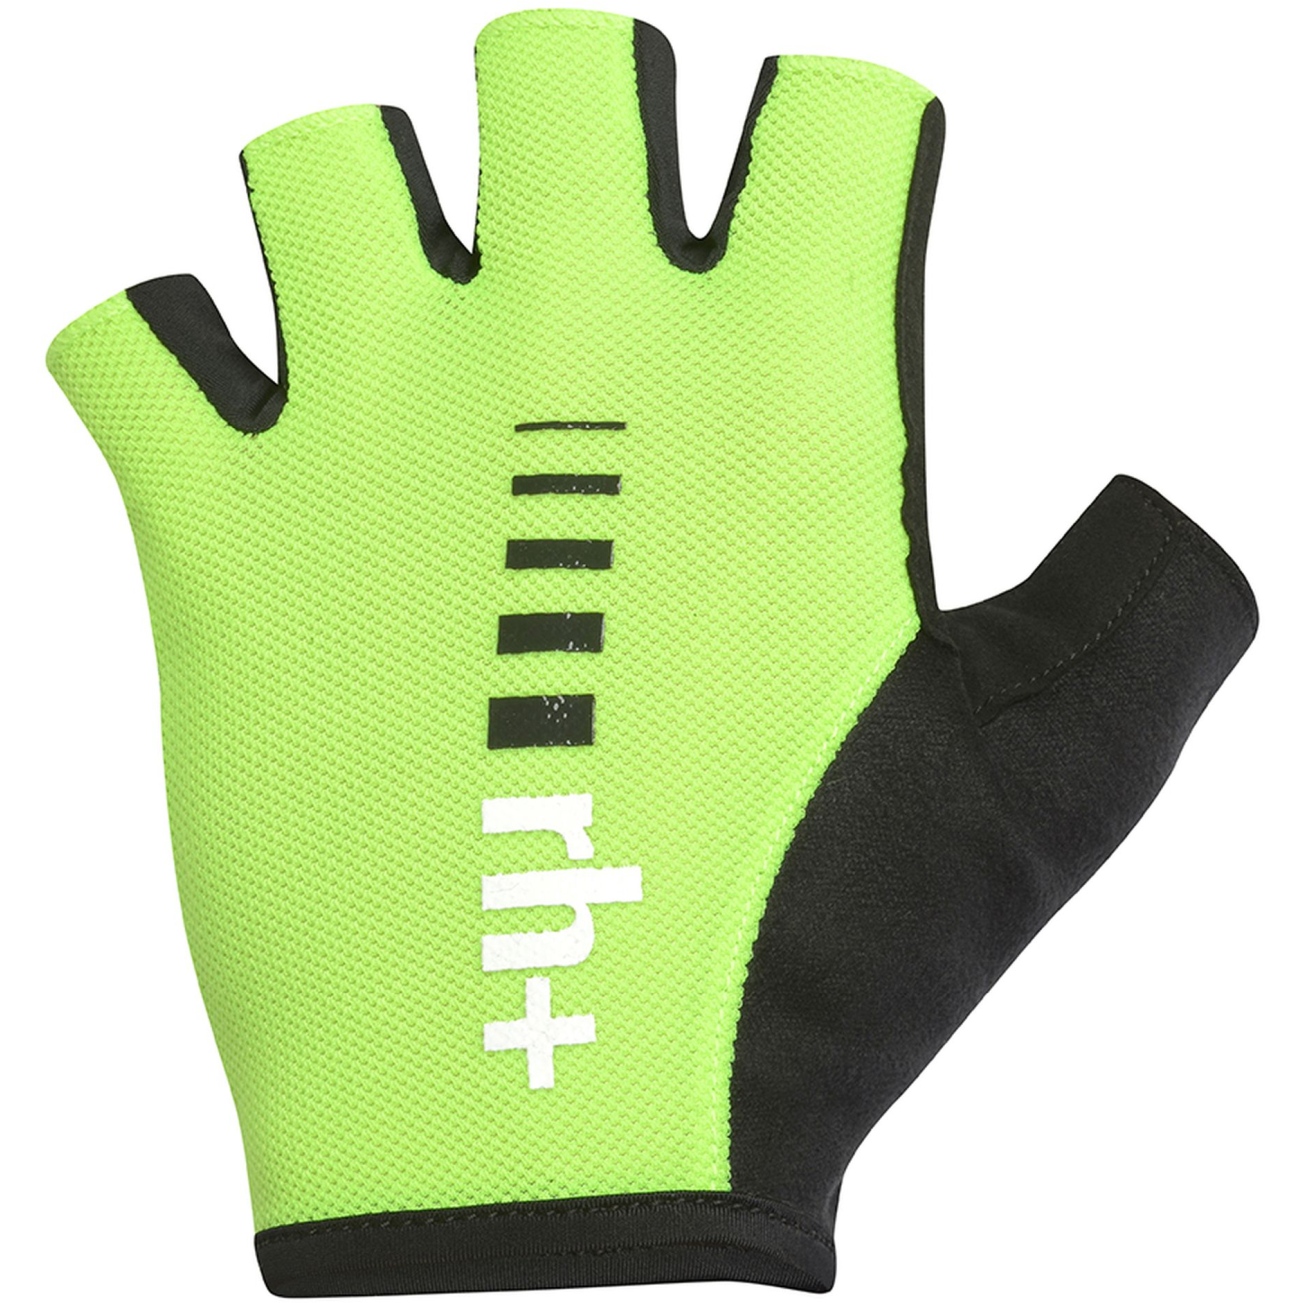 Picture of rh+ New Code Gloves - Black/Acid Lime